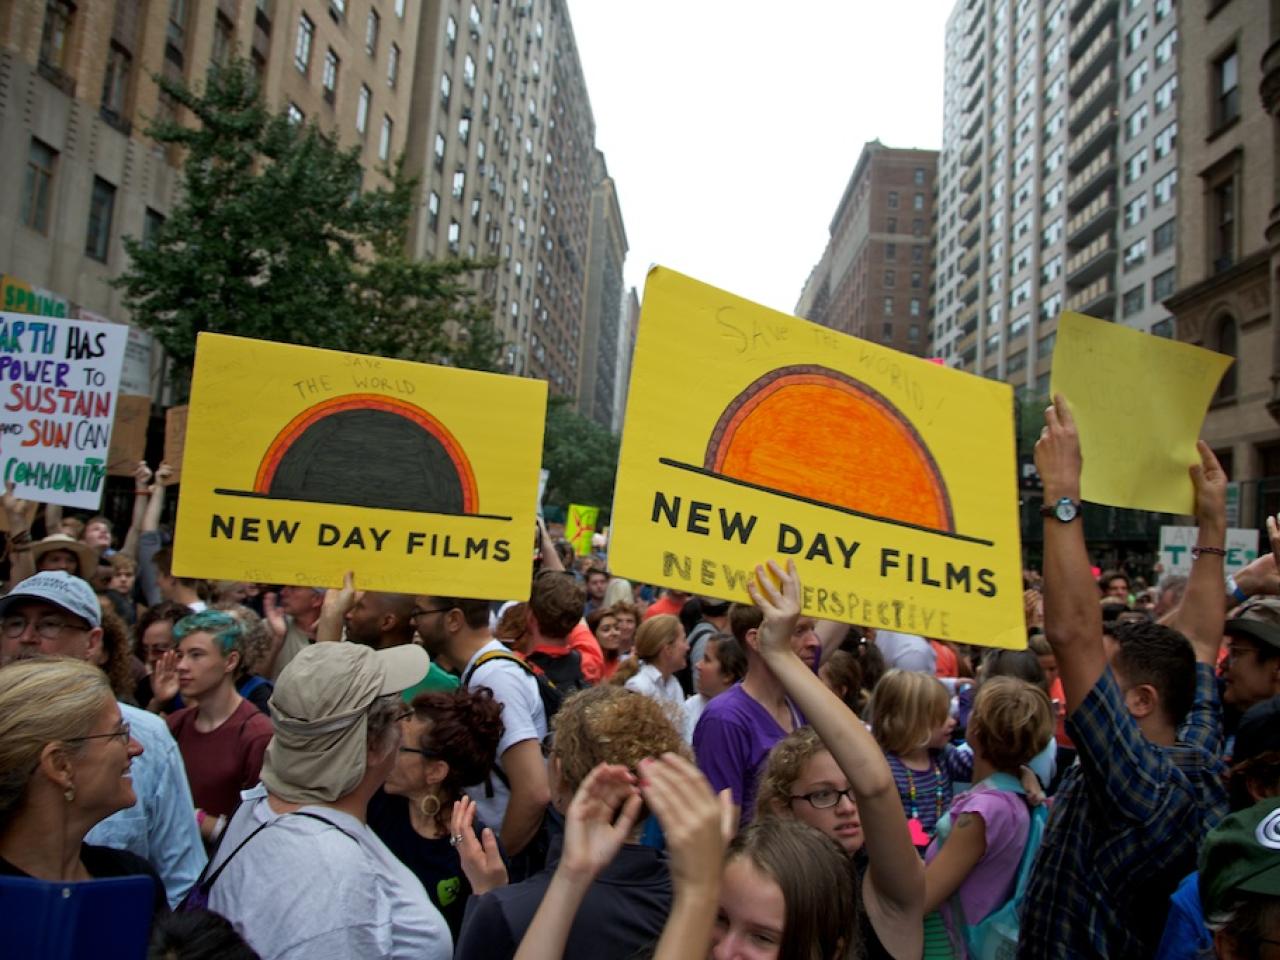 A large group of people of various races, ethnicities and genders mill around in a city street at the People’s Climate March. Several people hold posters up, three of which are yellow films with the New Day Films logo on them. Tall city buildings rise up on either side of the frame.